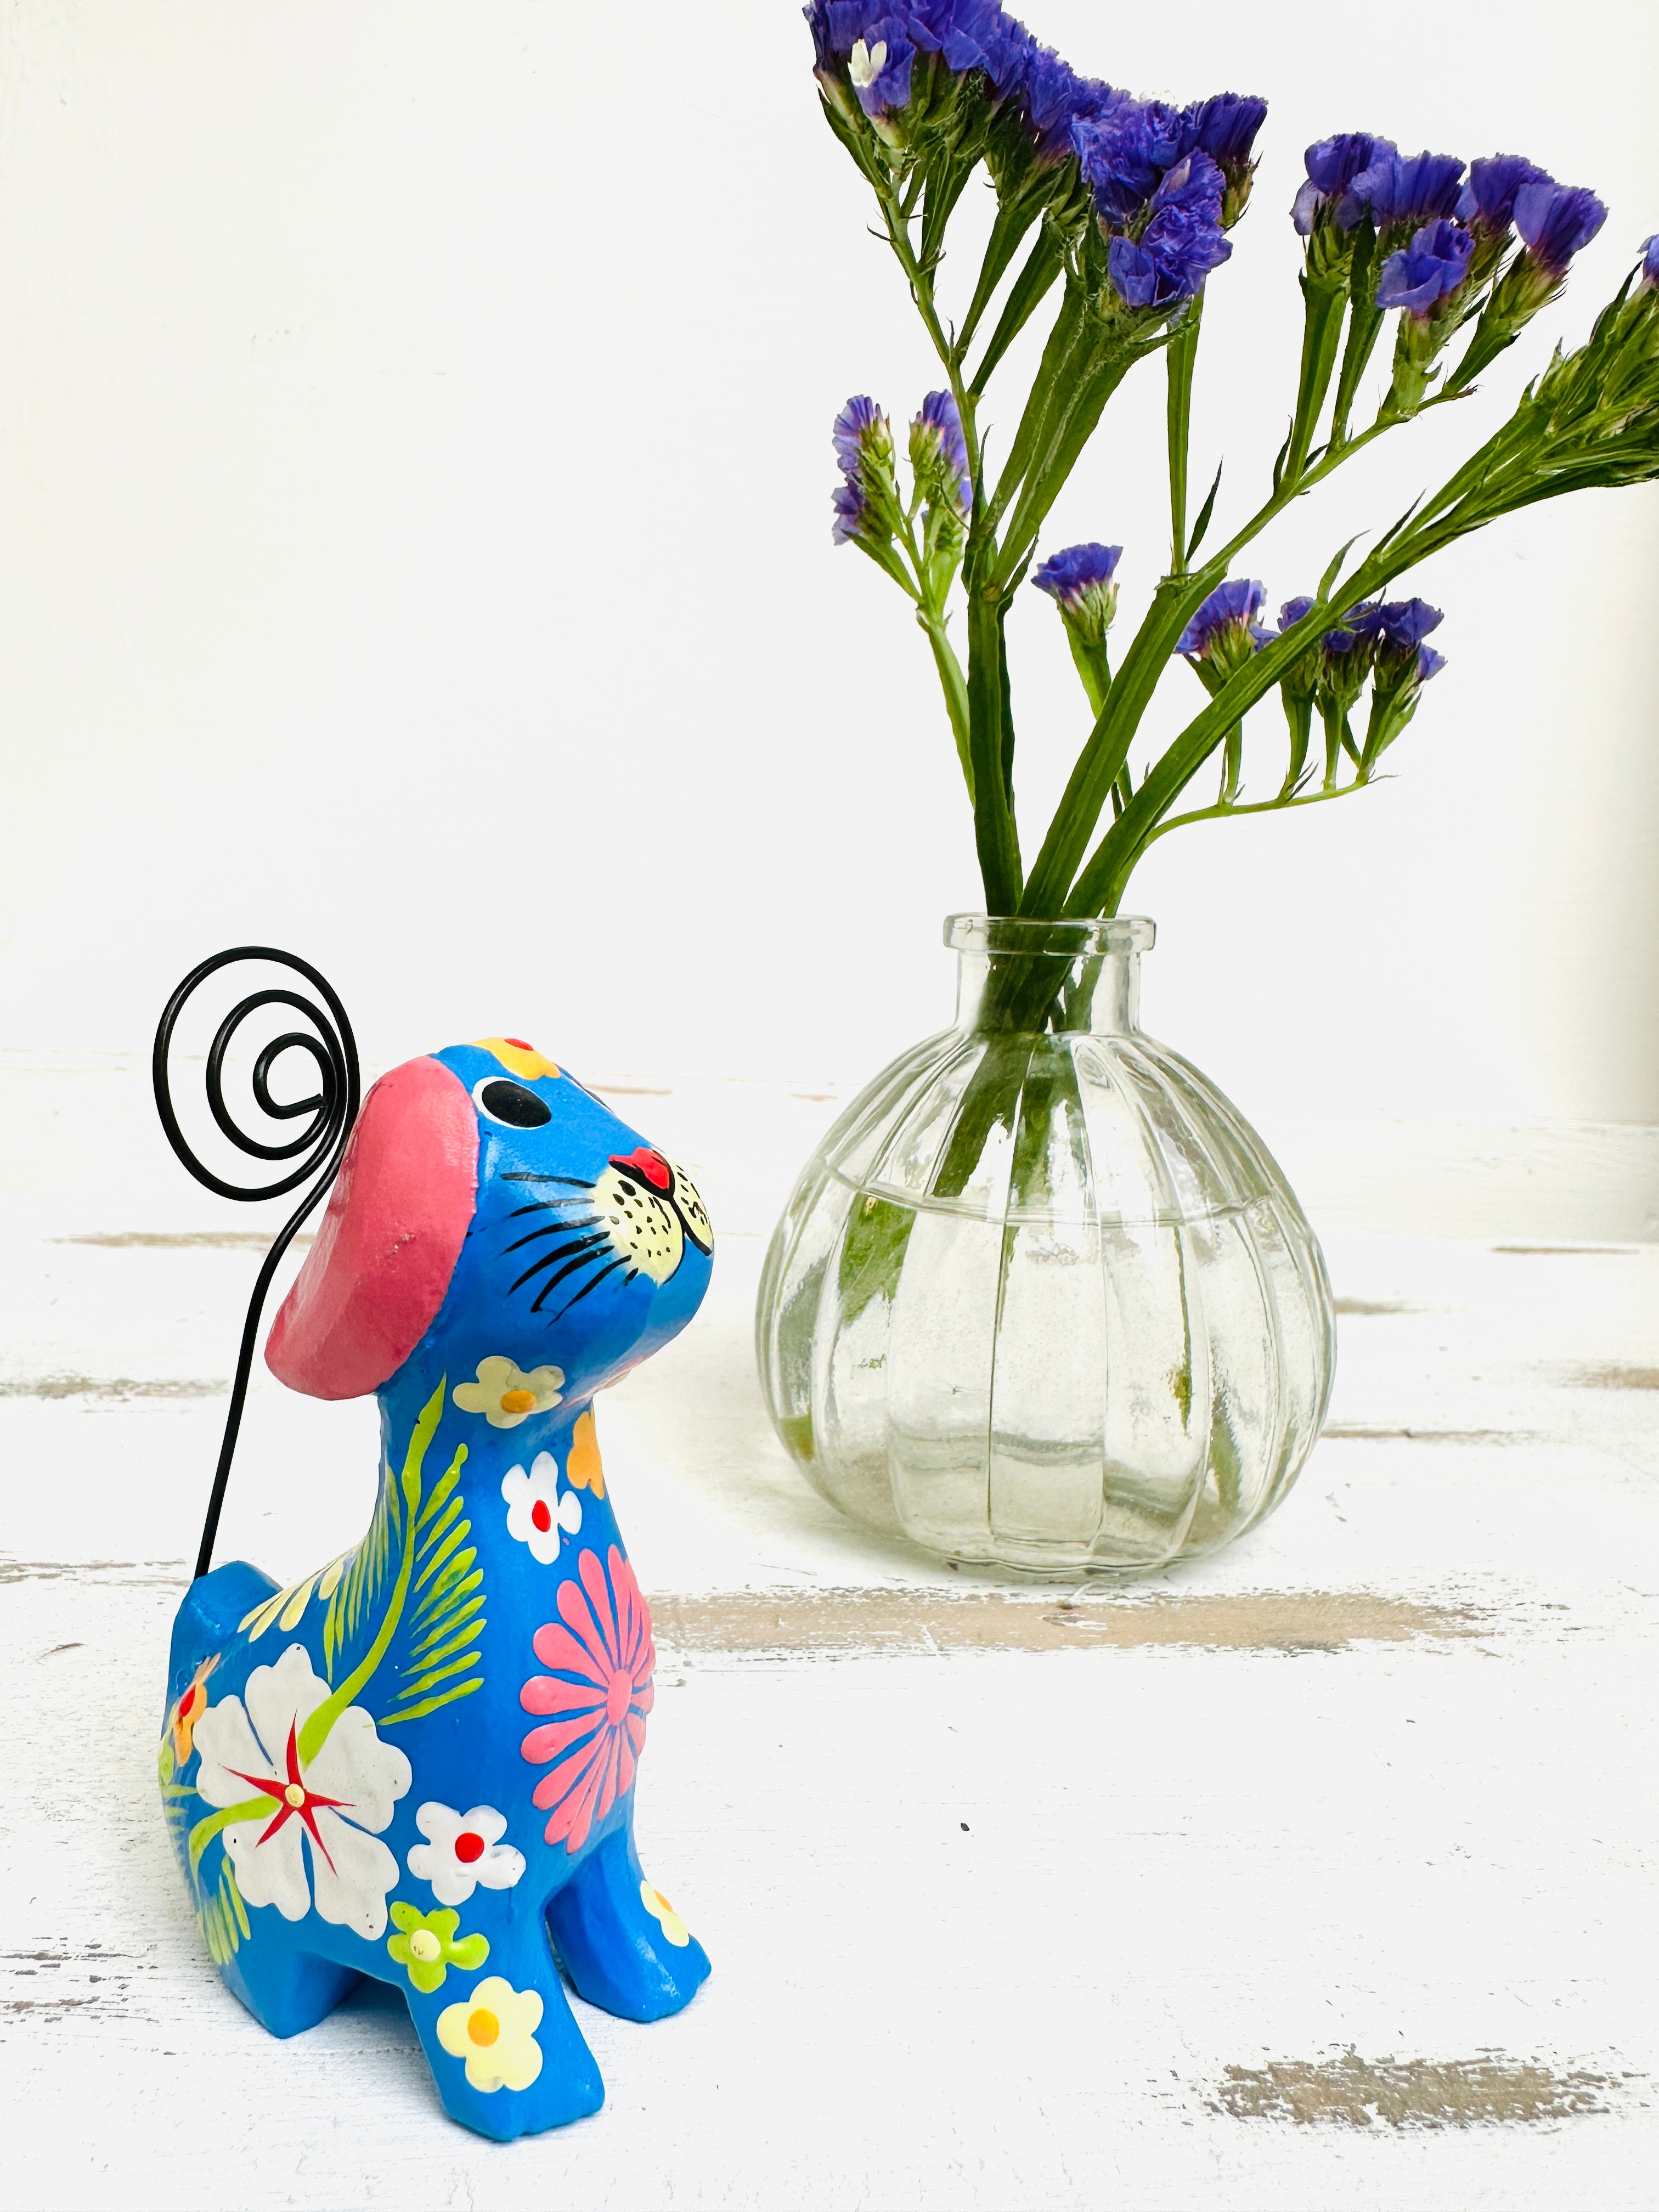 display view of blue flower dog next to a vase of flowers